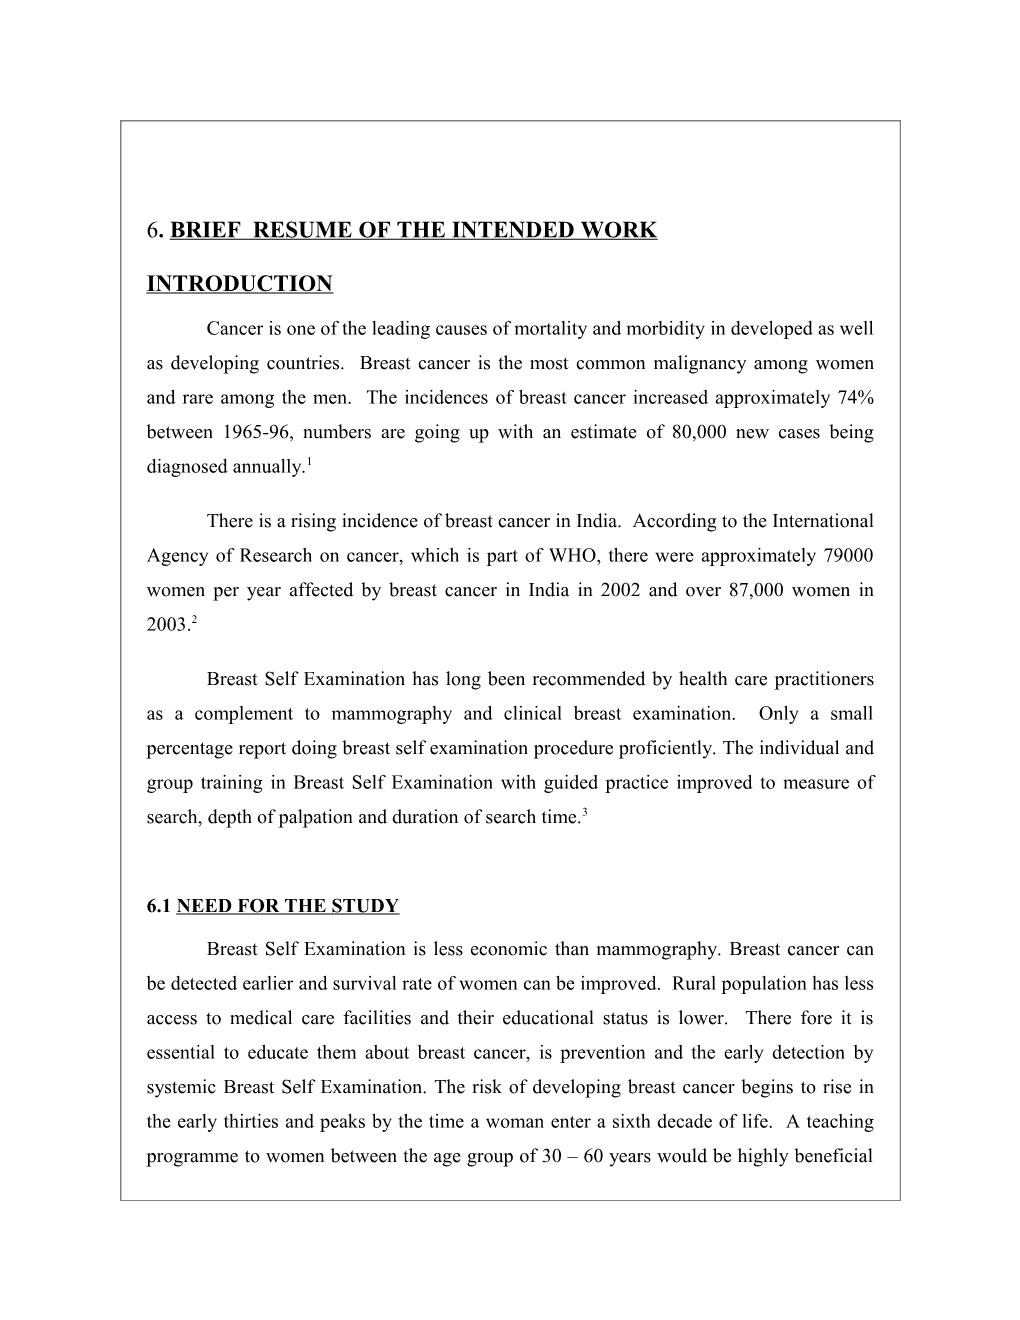 6 . Brief Resume of the Intended Work s1